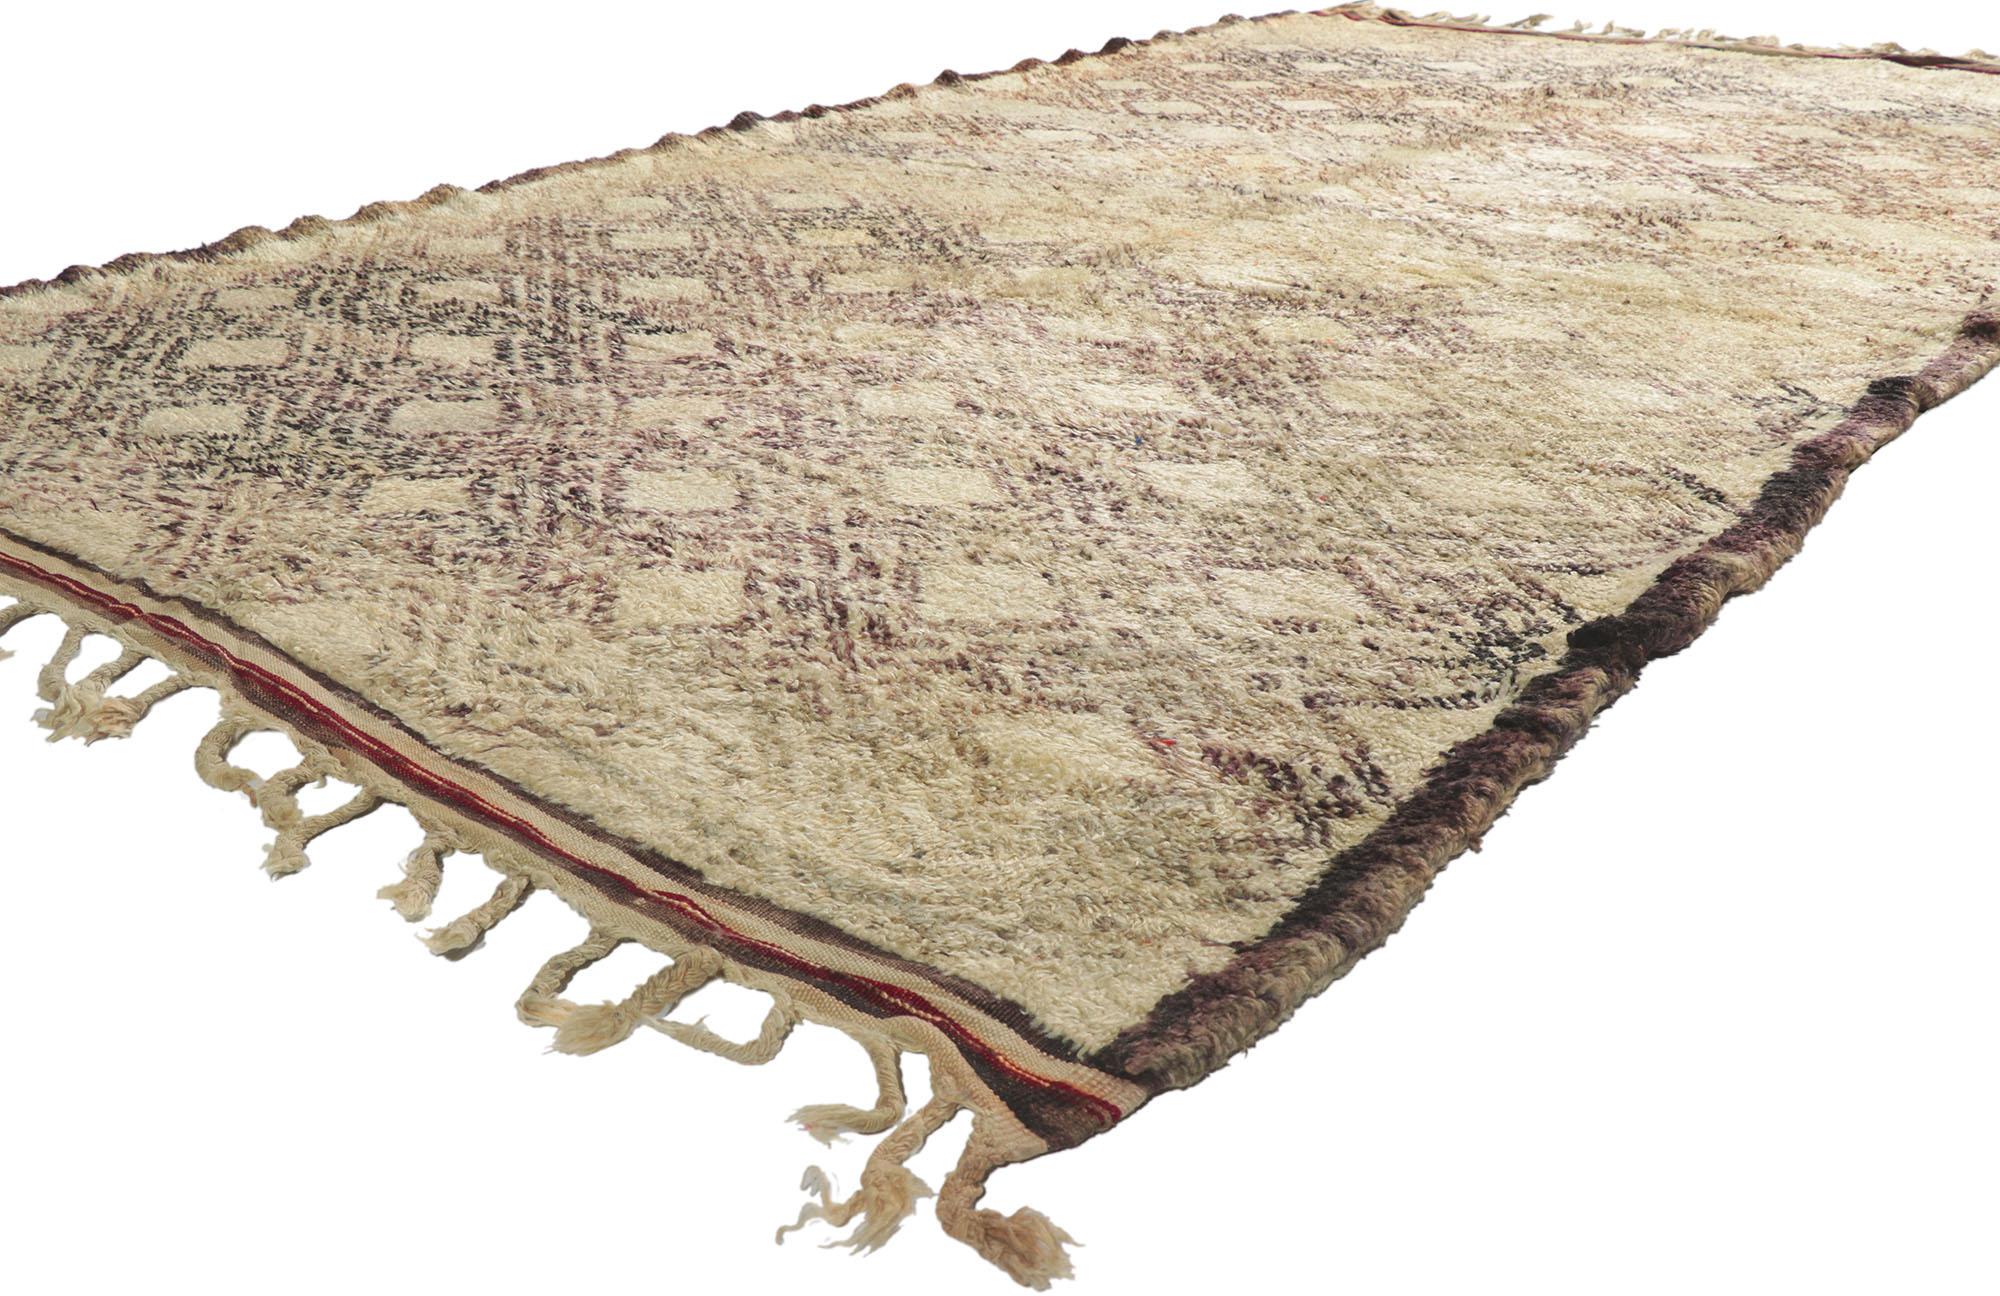 21397 Vintage Berber Moroccan Beni Ourain Rug. With its simplicity, plush pile and tribal style, this hand knotted wool vintage Berber Beni Ourain Moroccan rug is a captivating vision of woven beauty. It features a diamond lattice composed of lines